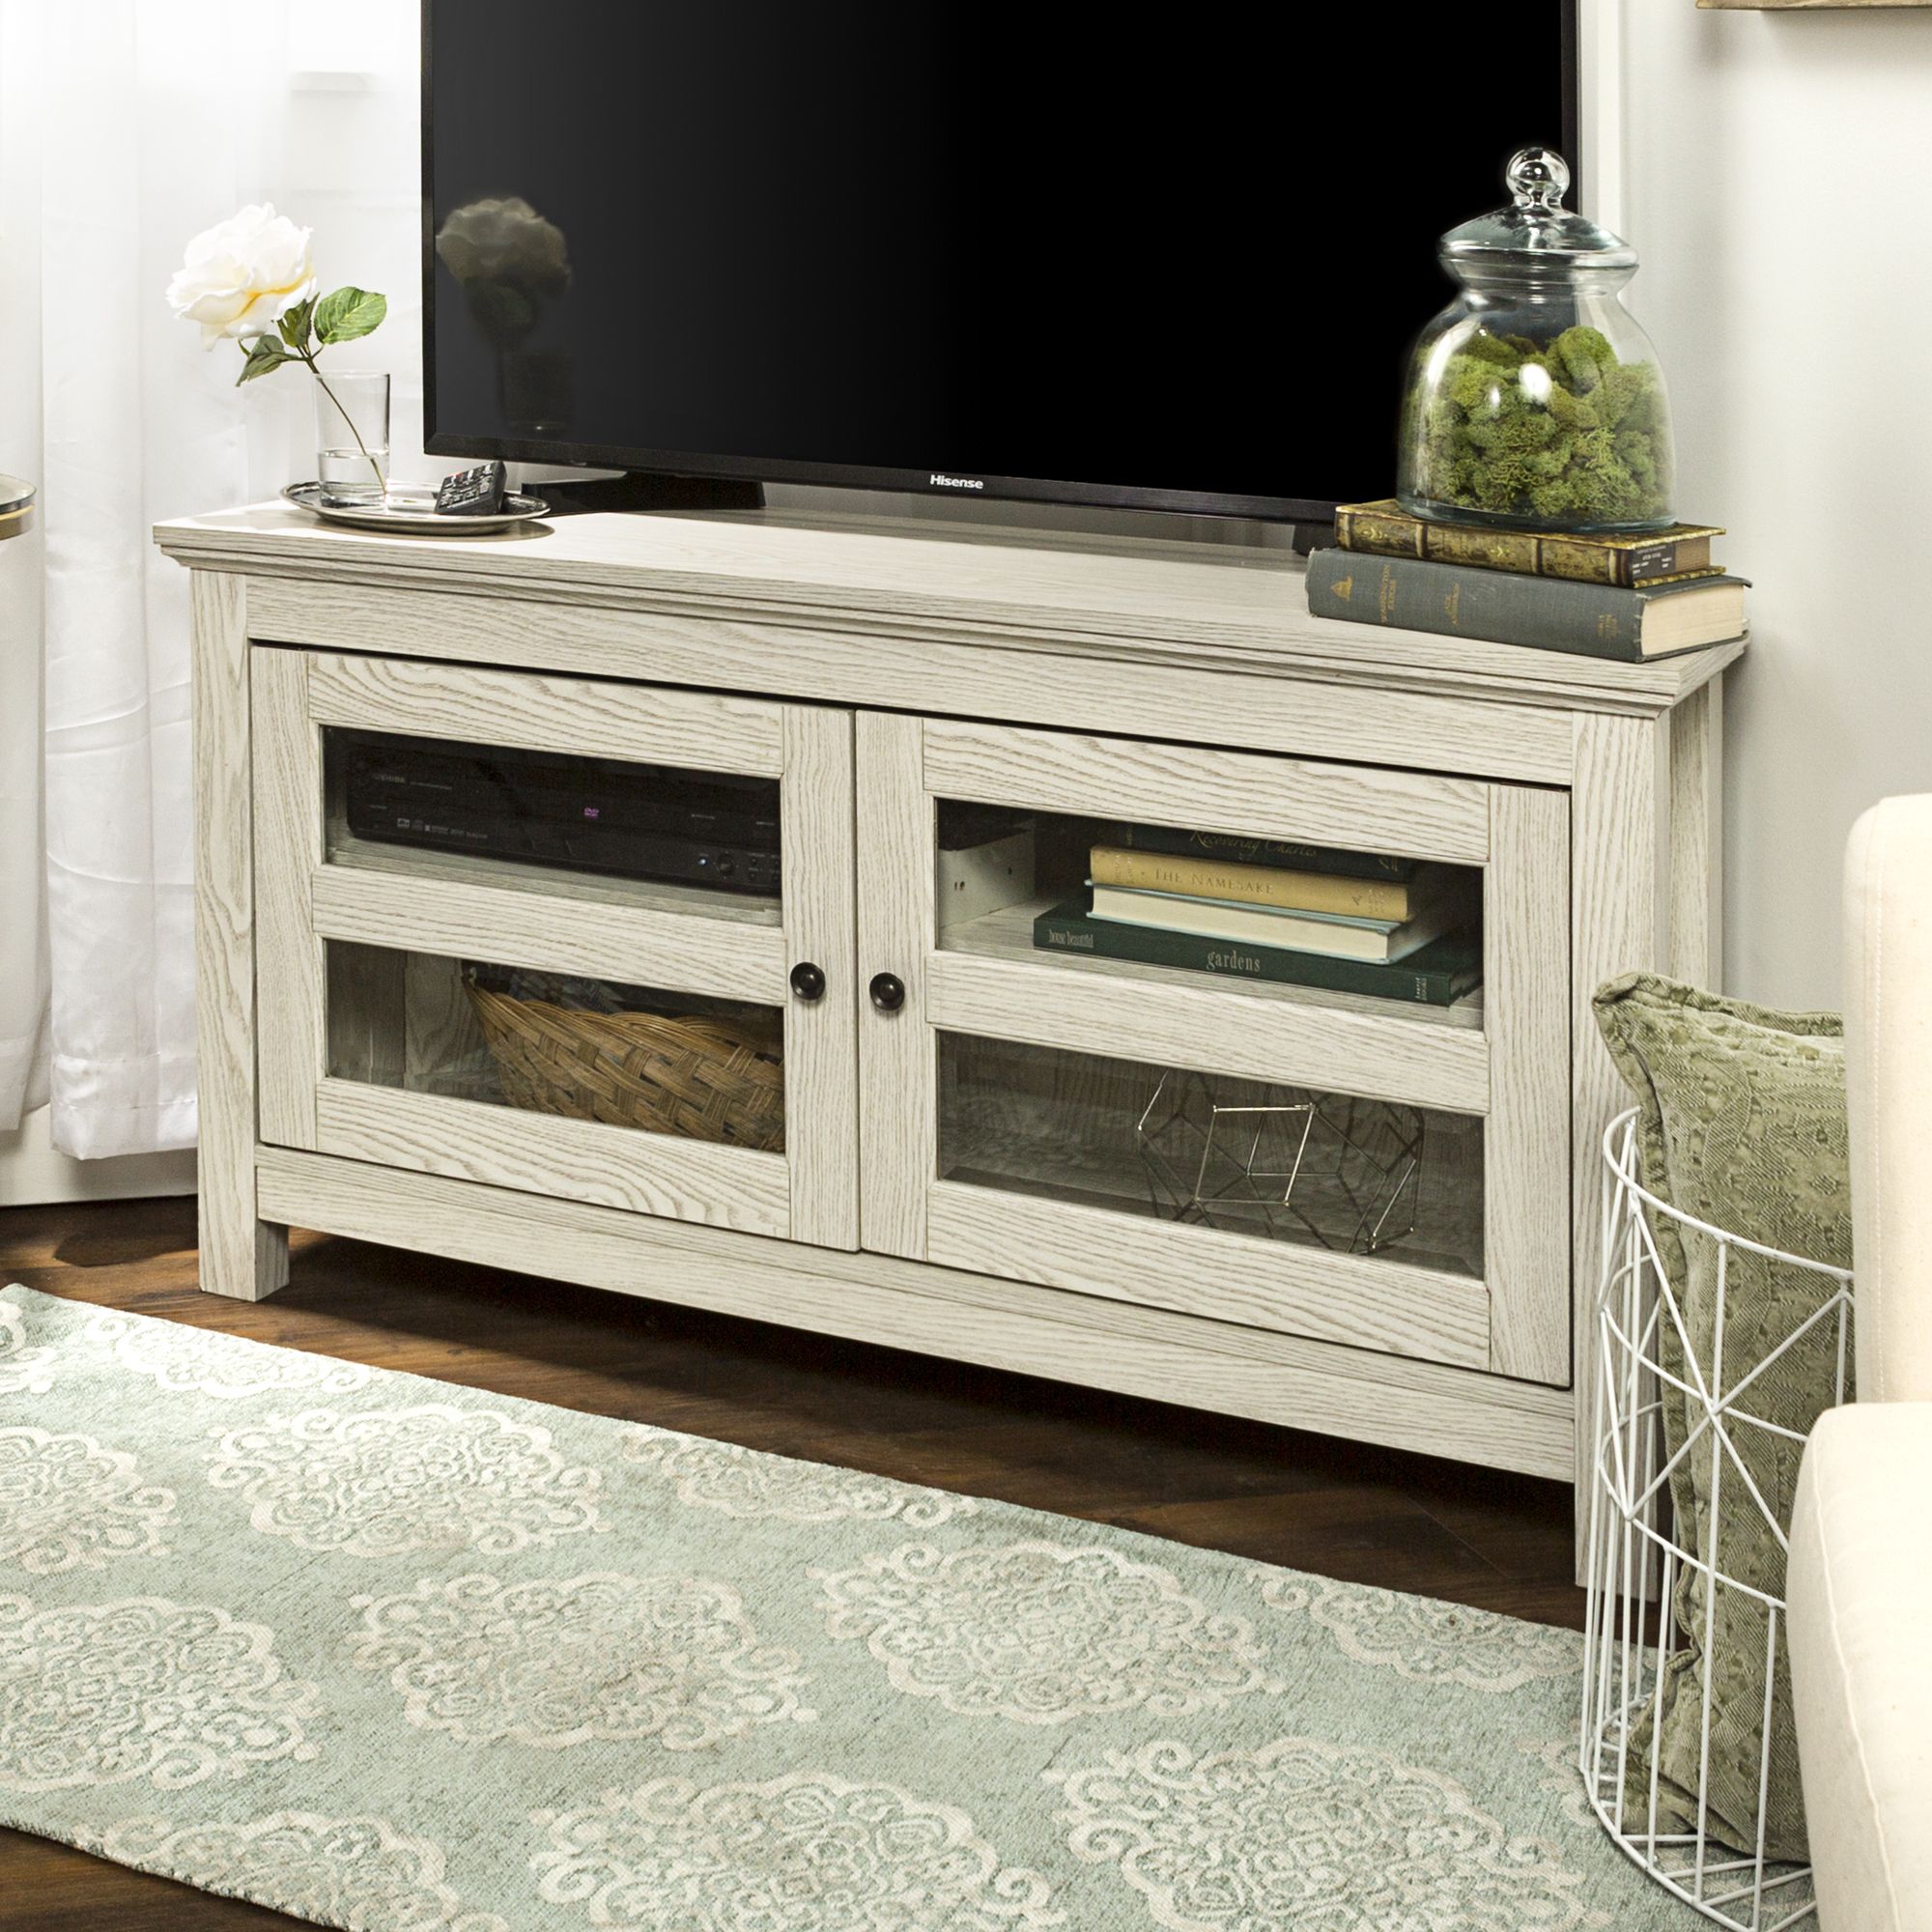 Walker Edison Wood Corner Tv Stand For Tvs Up To 48 In Spellman Tv Stands For Tvs Up To 55&quot; (View 4 of 15)